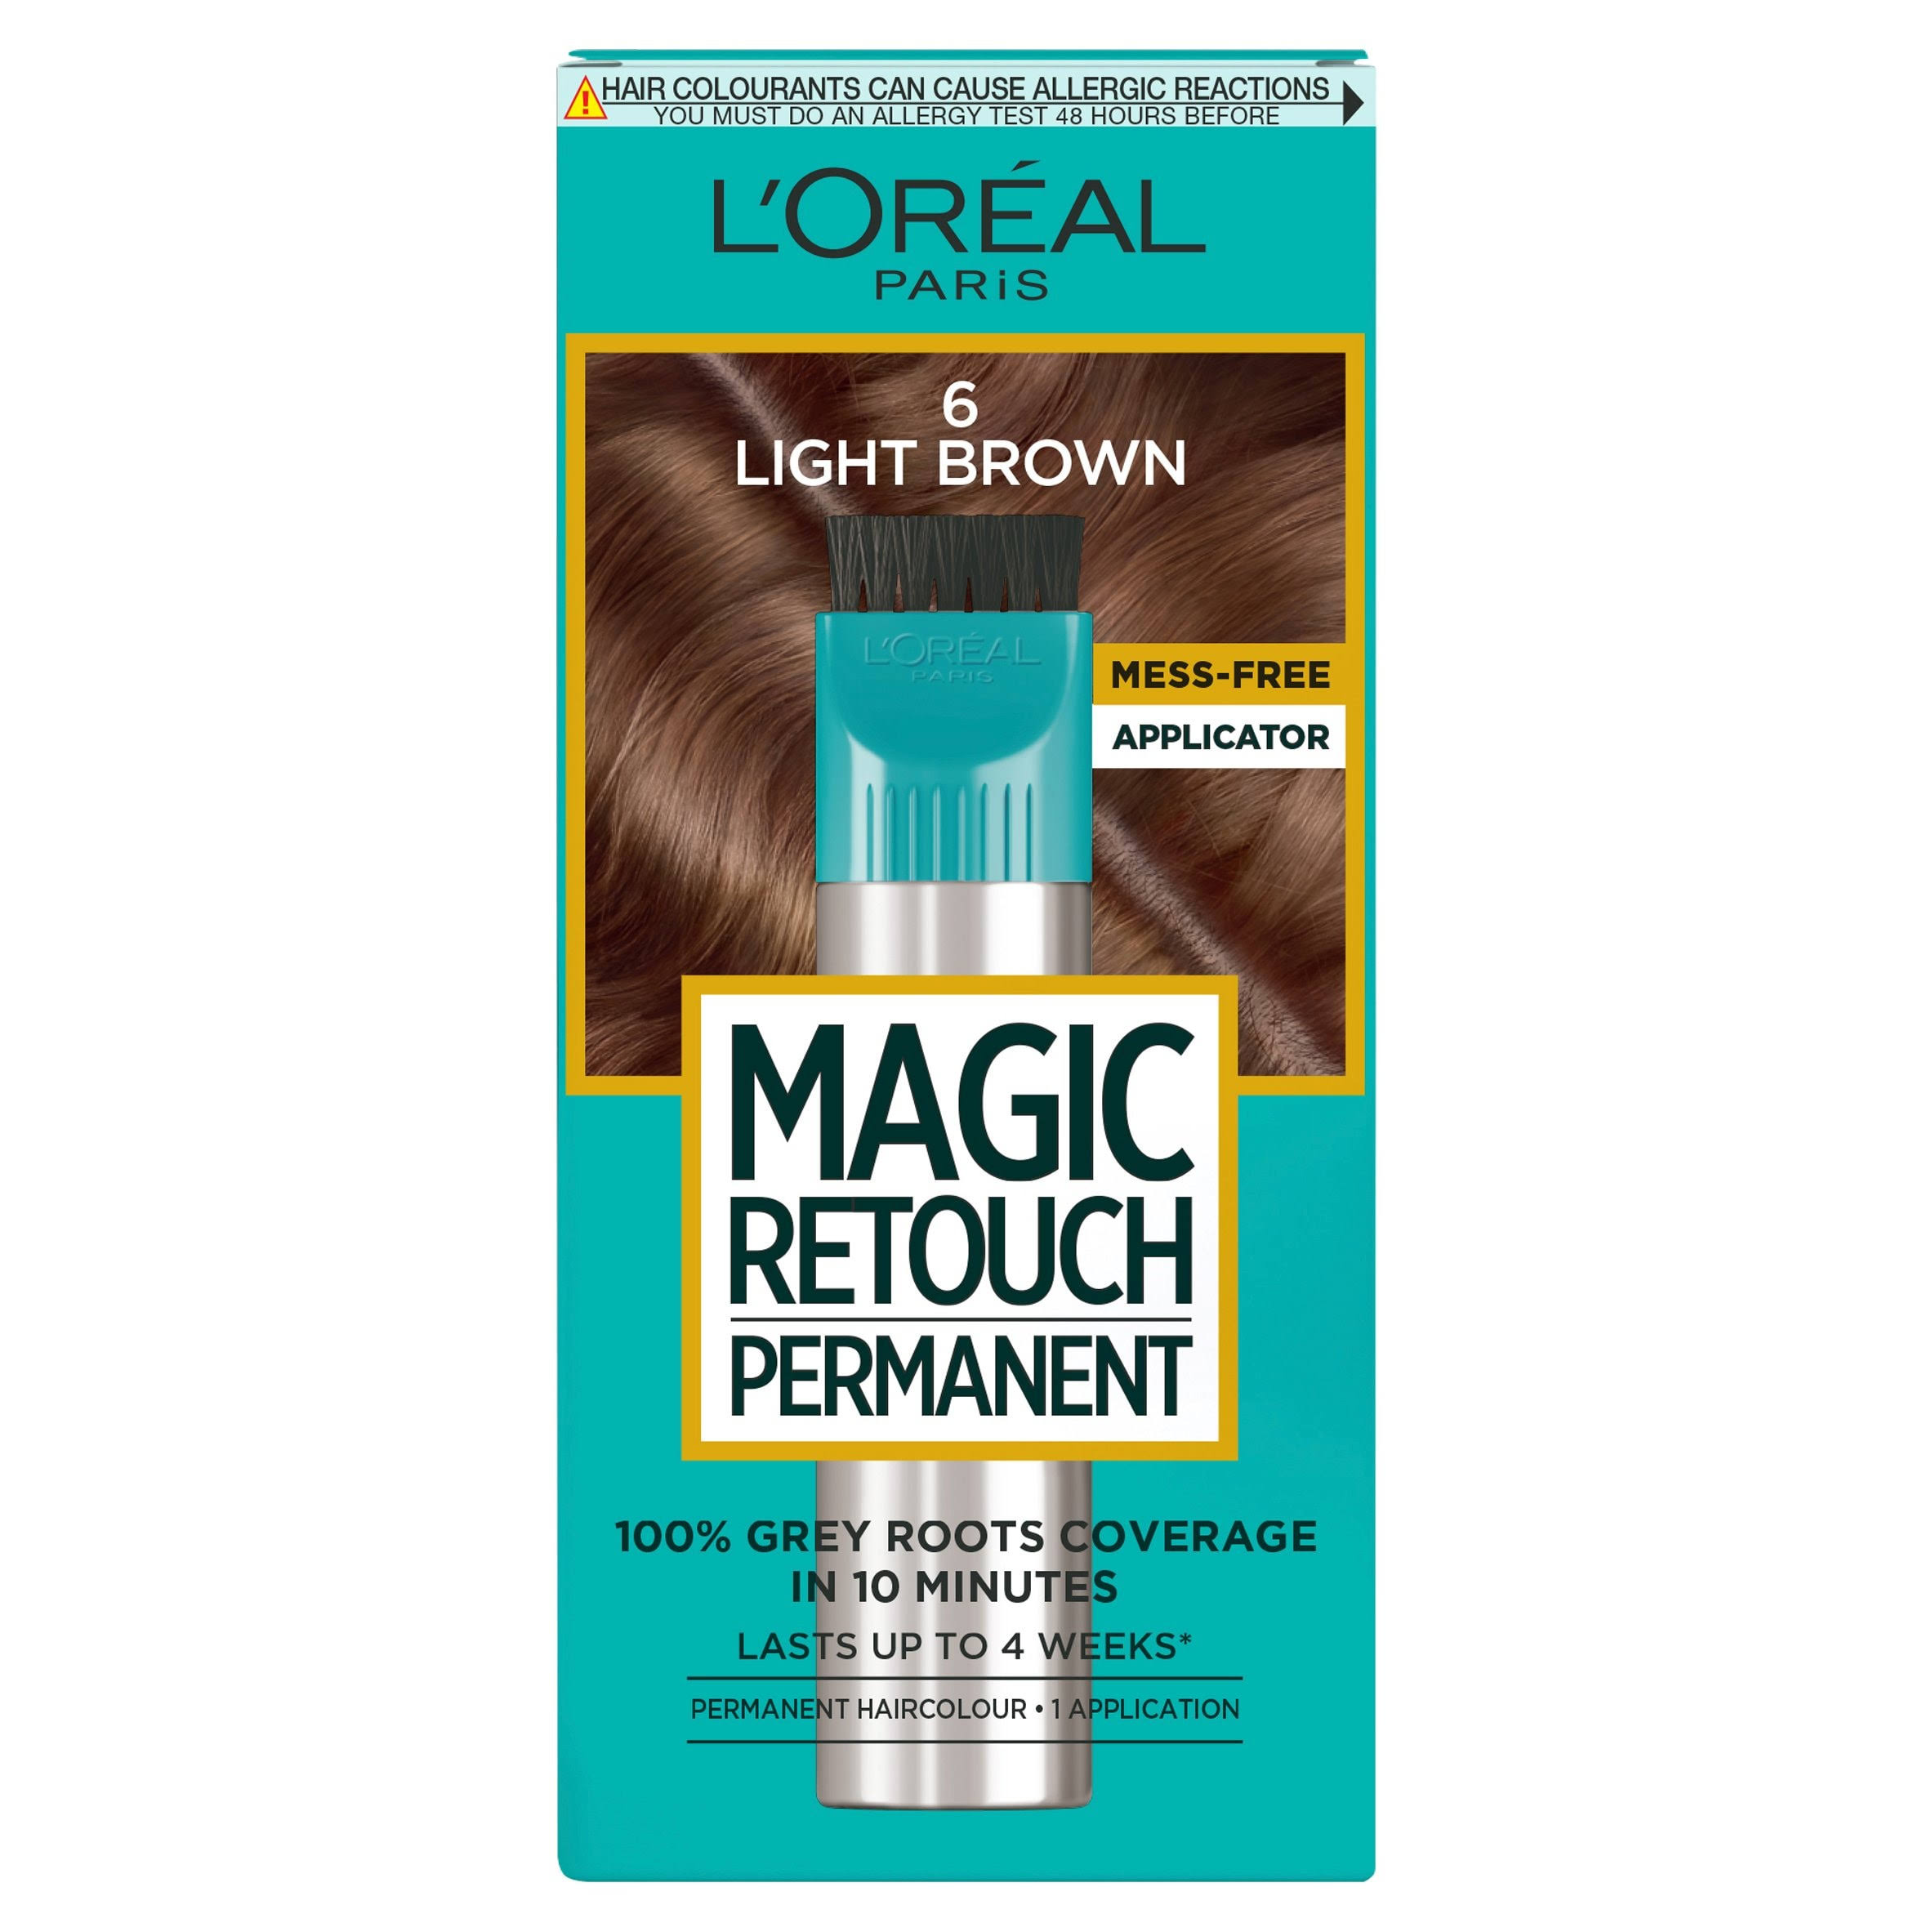 L'Oreal Paris Magic Retouch Permanent Root Concealer, Touching Up Grey Hair Dye, Light Brown 6, 95 G (Pack of 1)